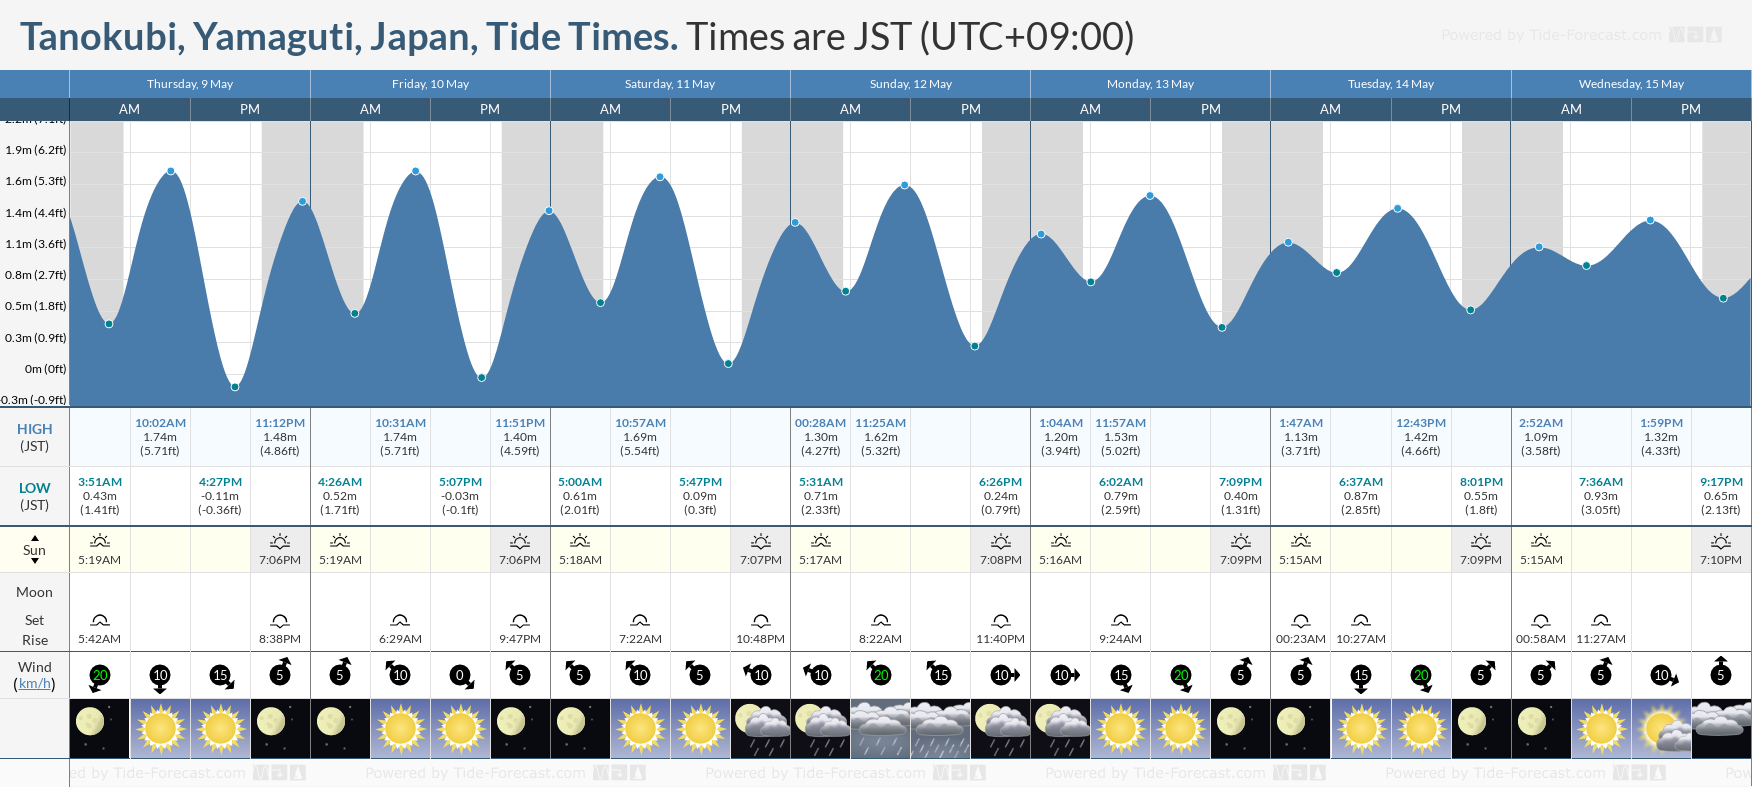 Tanokubi, Yamaguti, Japan Tide Chart including high and low tide tide times for the next 7 days